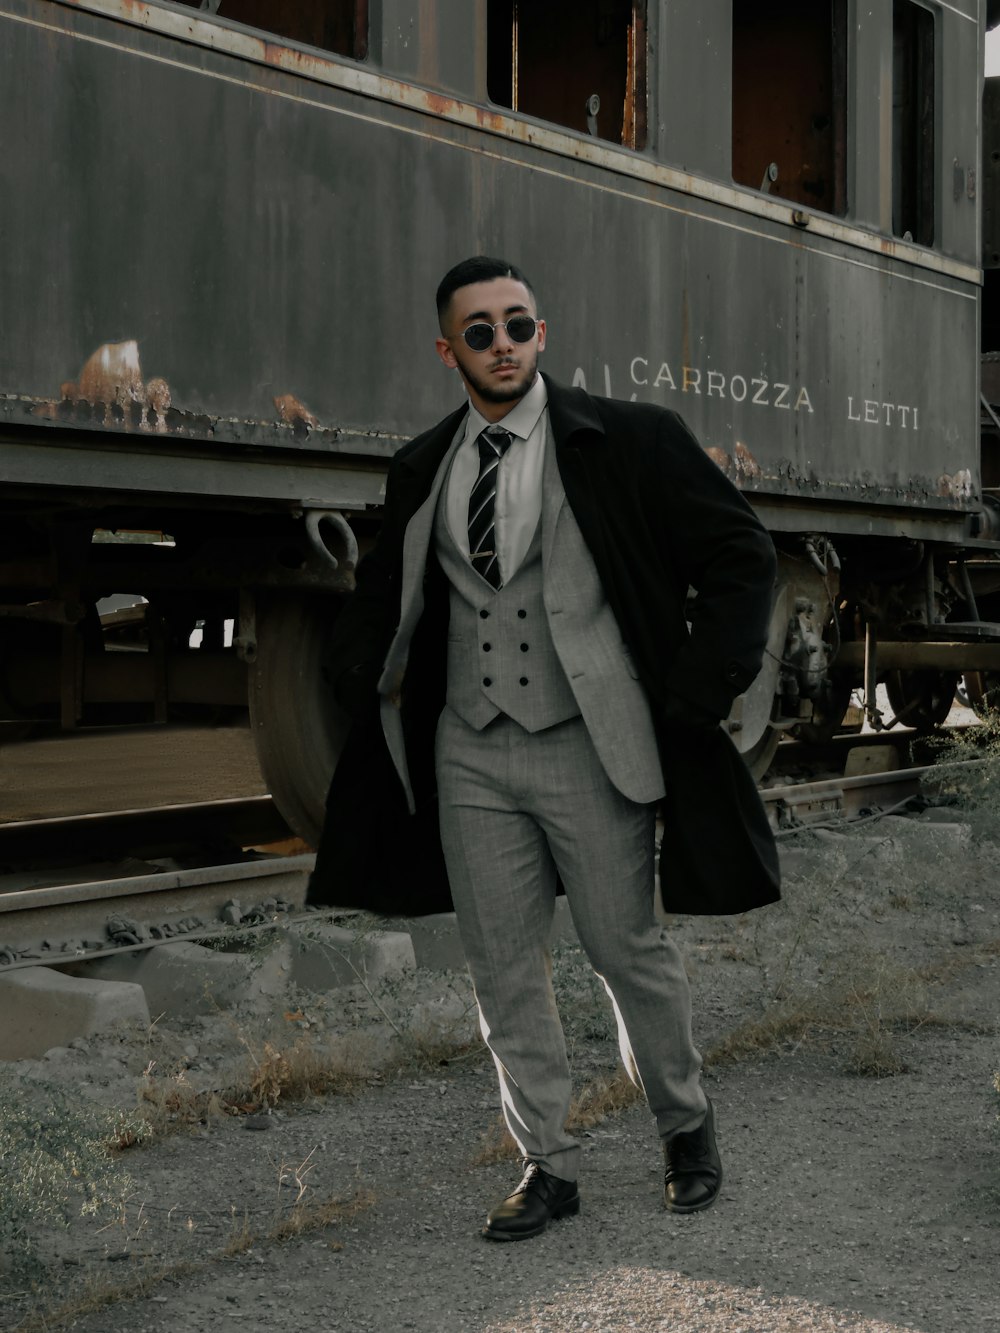 a man in a suit and tie standing in front of a train